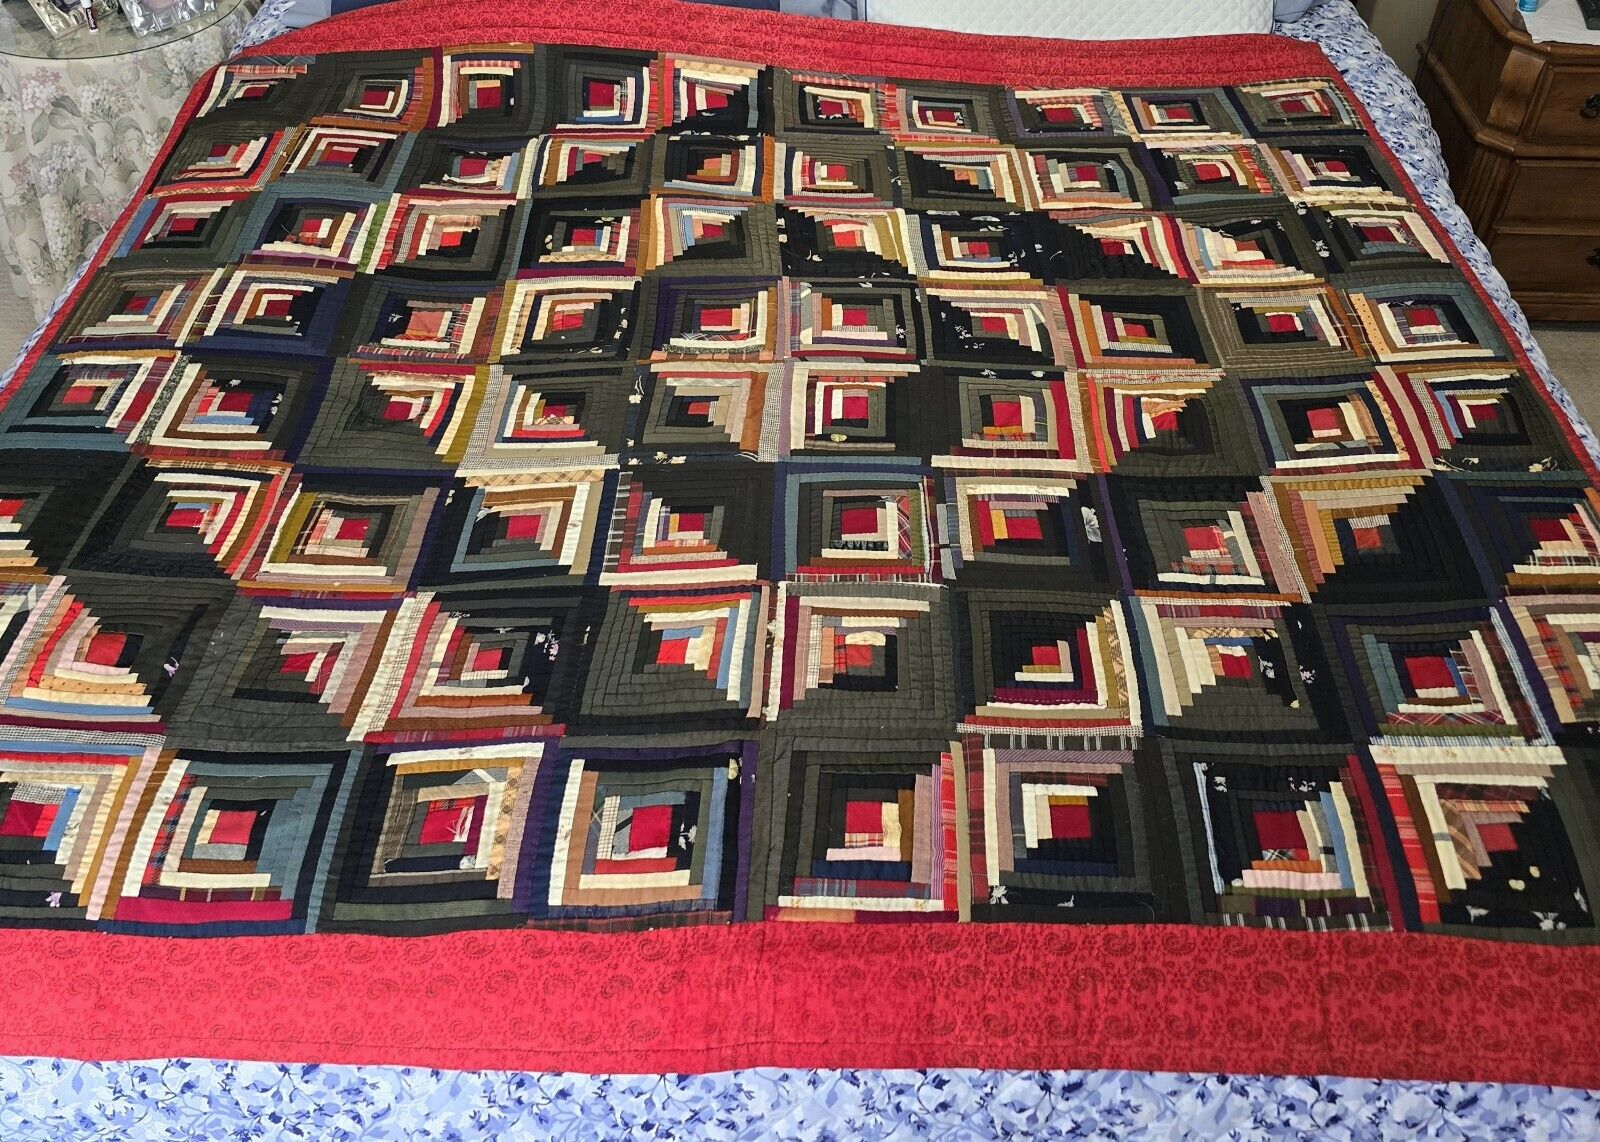 ANTIQUE 1900'S LOG CABIN BARN RAISING LIGHT AND DARK HAND STITCHED QUILT, MUSEUM